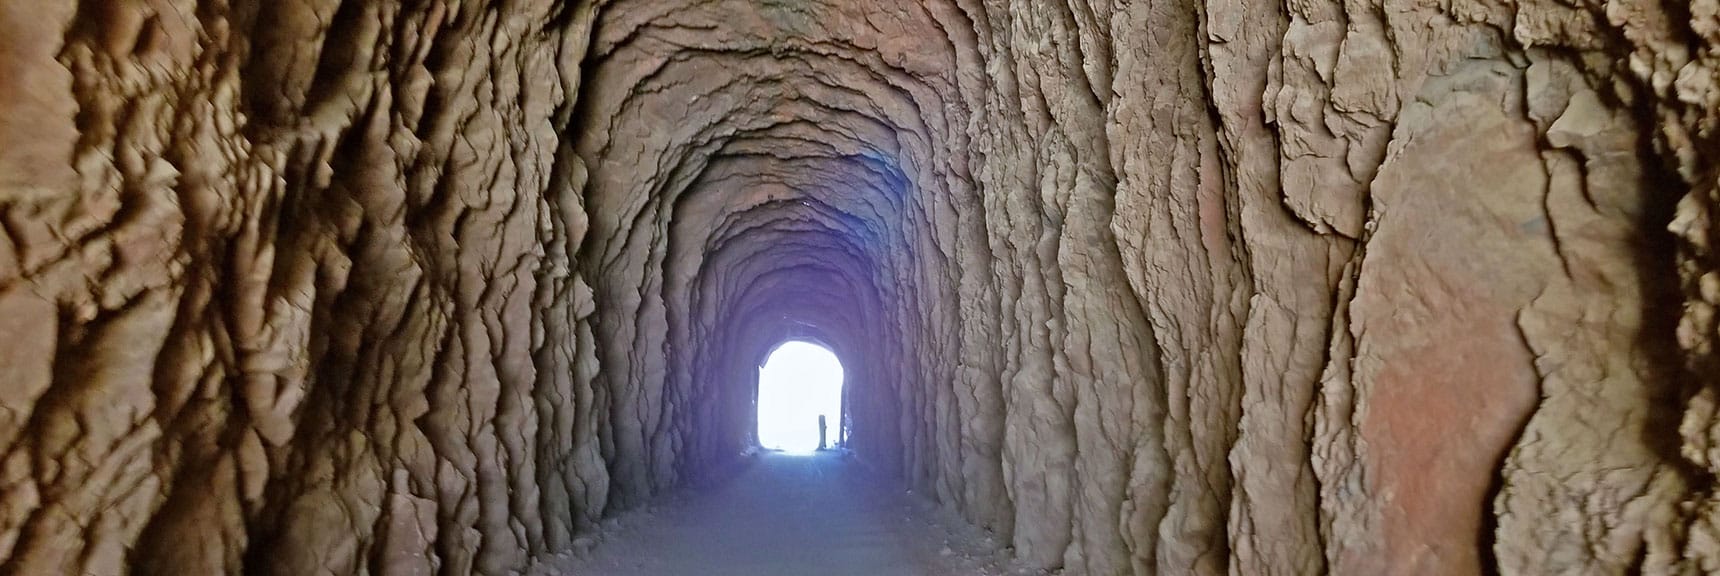 More Interior Carved Tunnel Rock | Historic Railroad Trail | Lake Mead National Recreation Area, Nevada